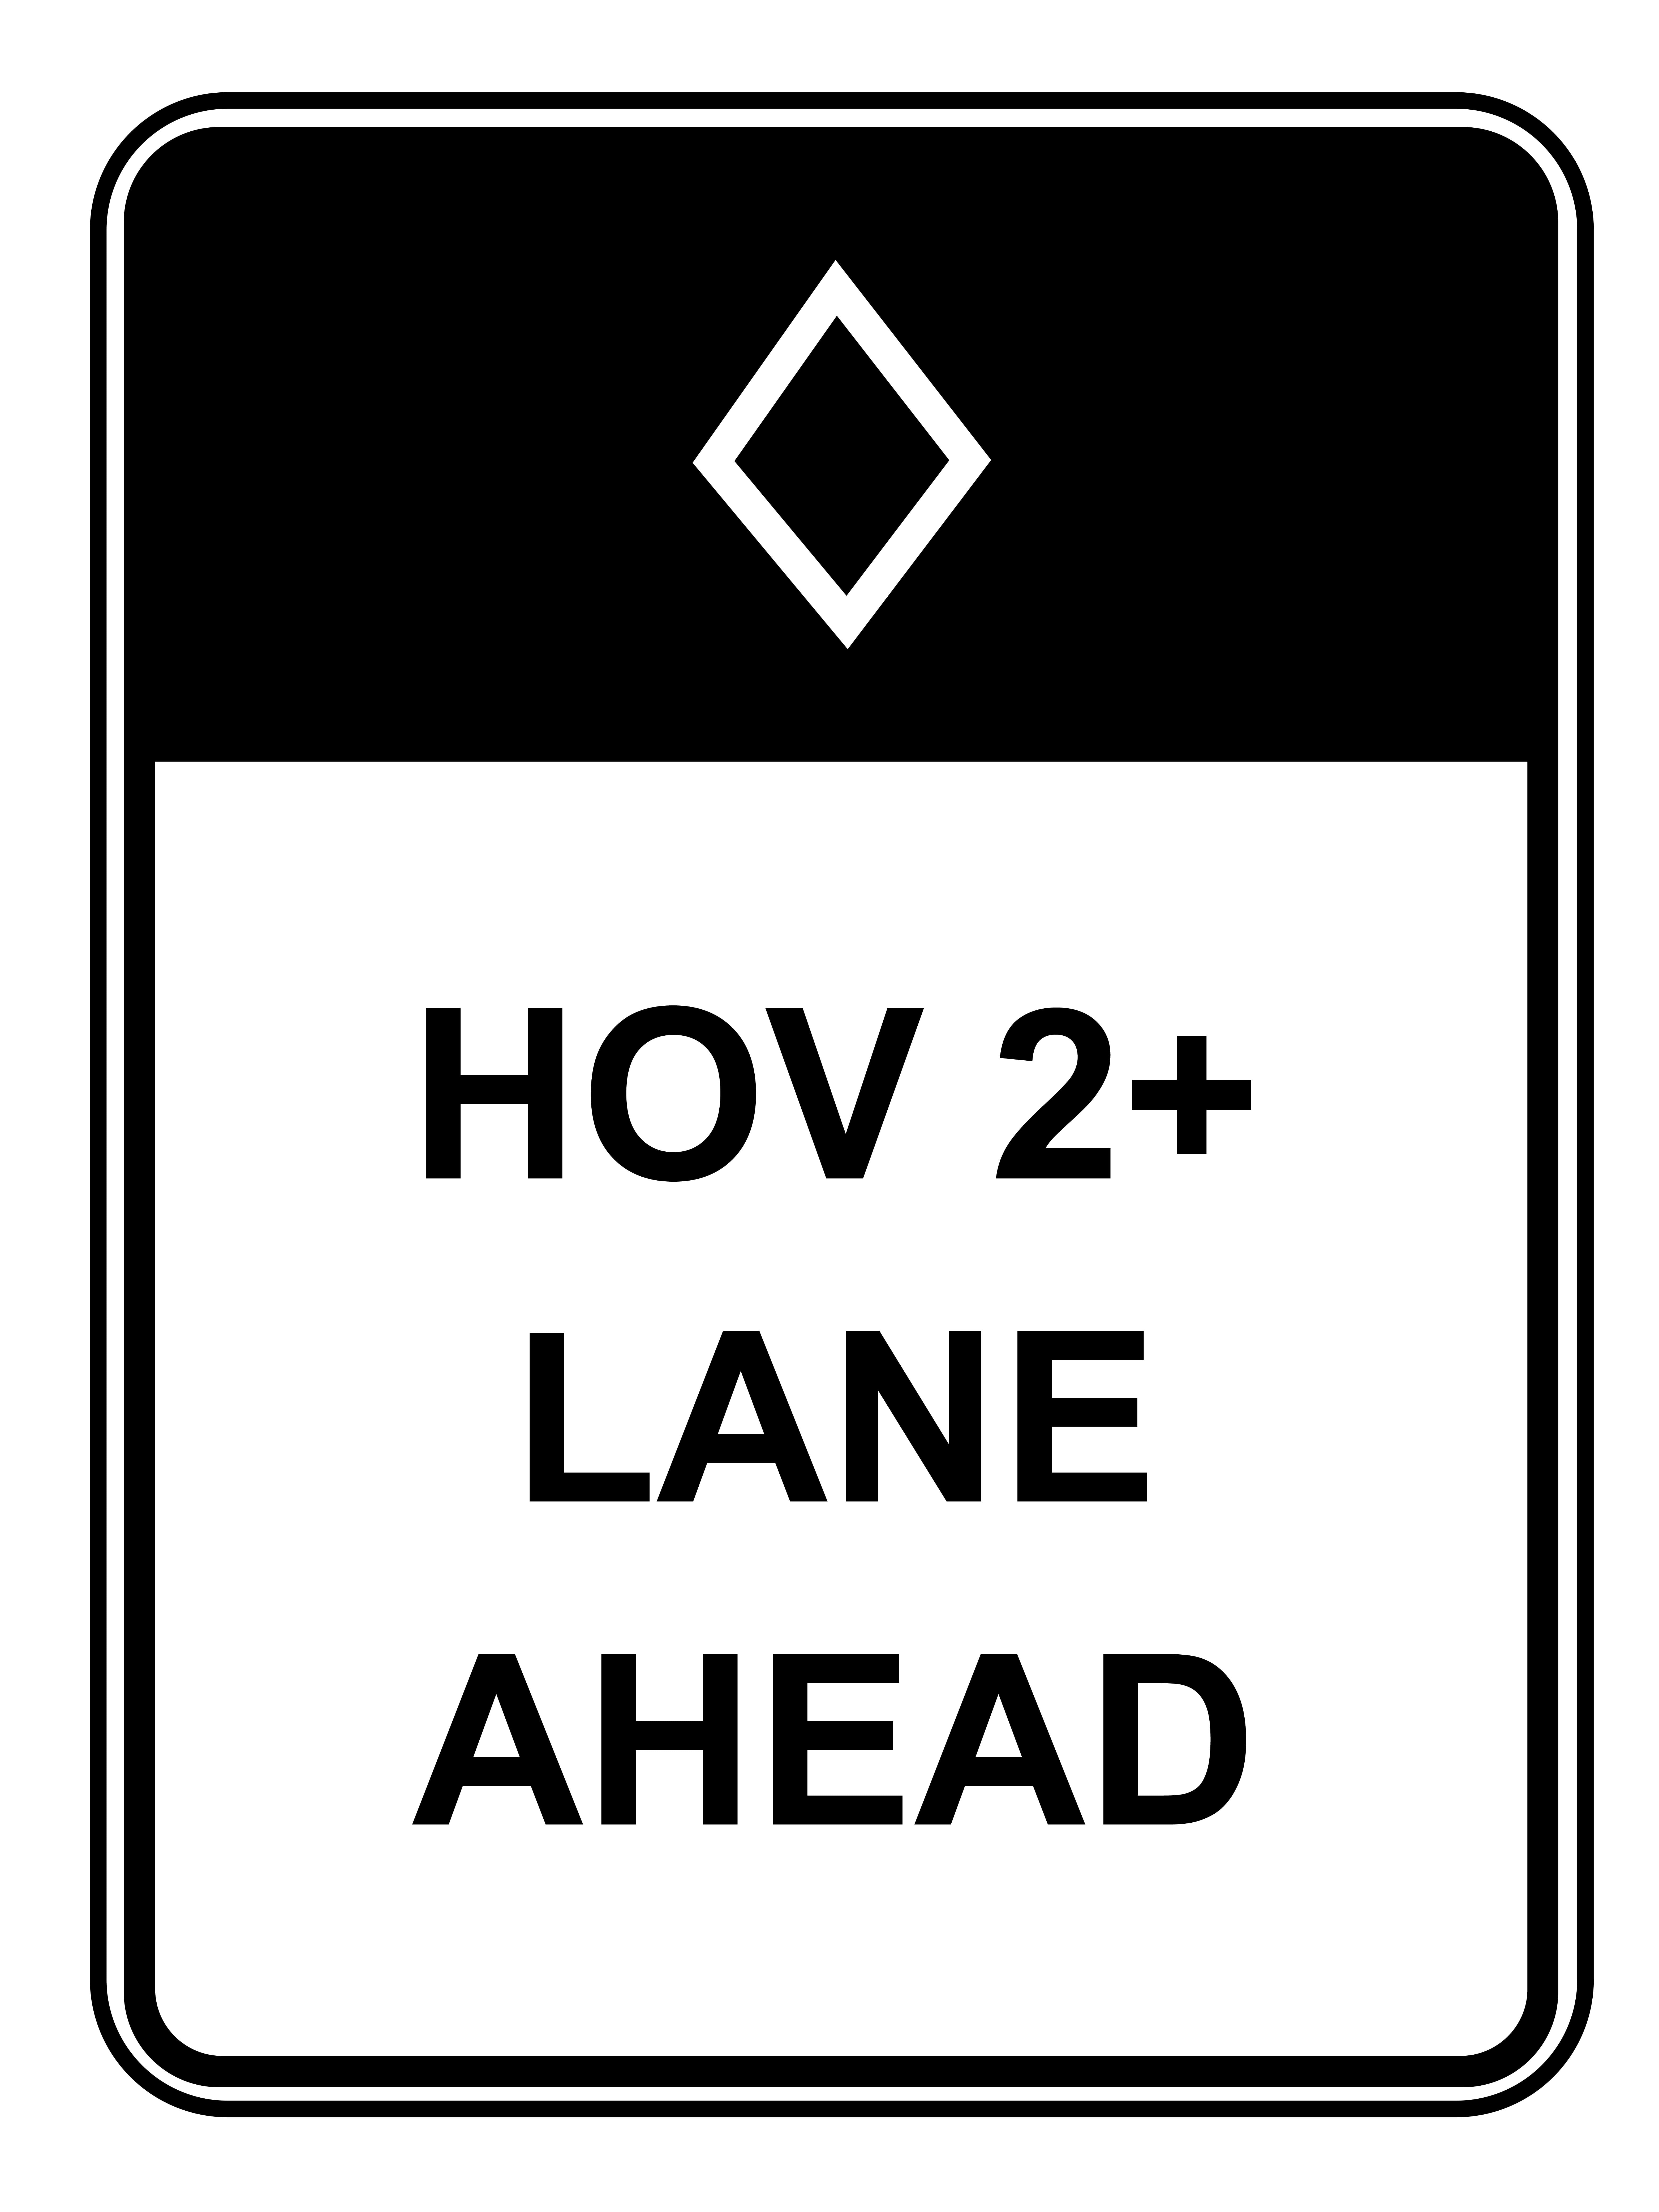 Two or more persons lane sign